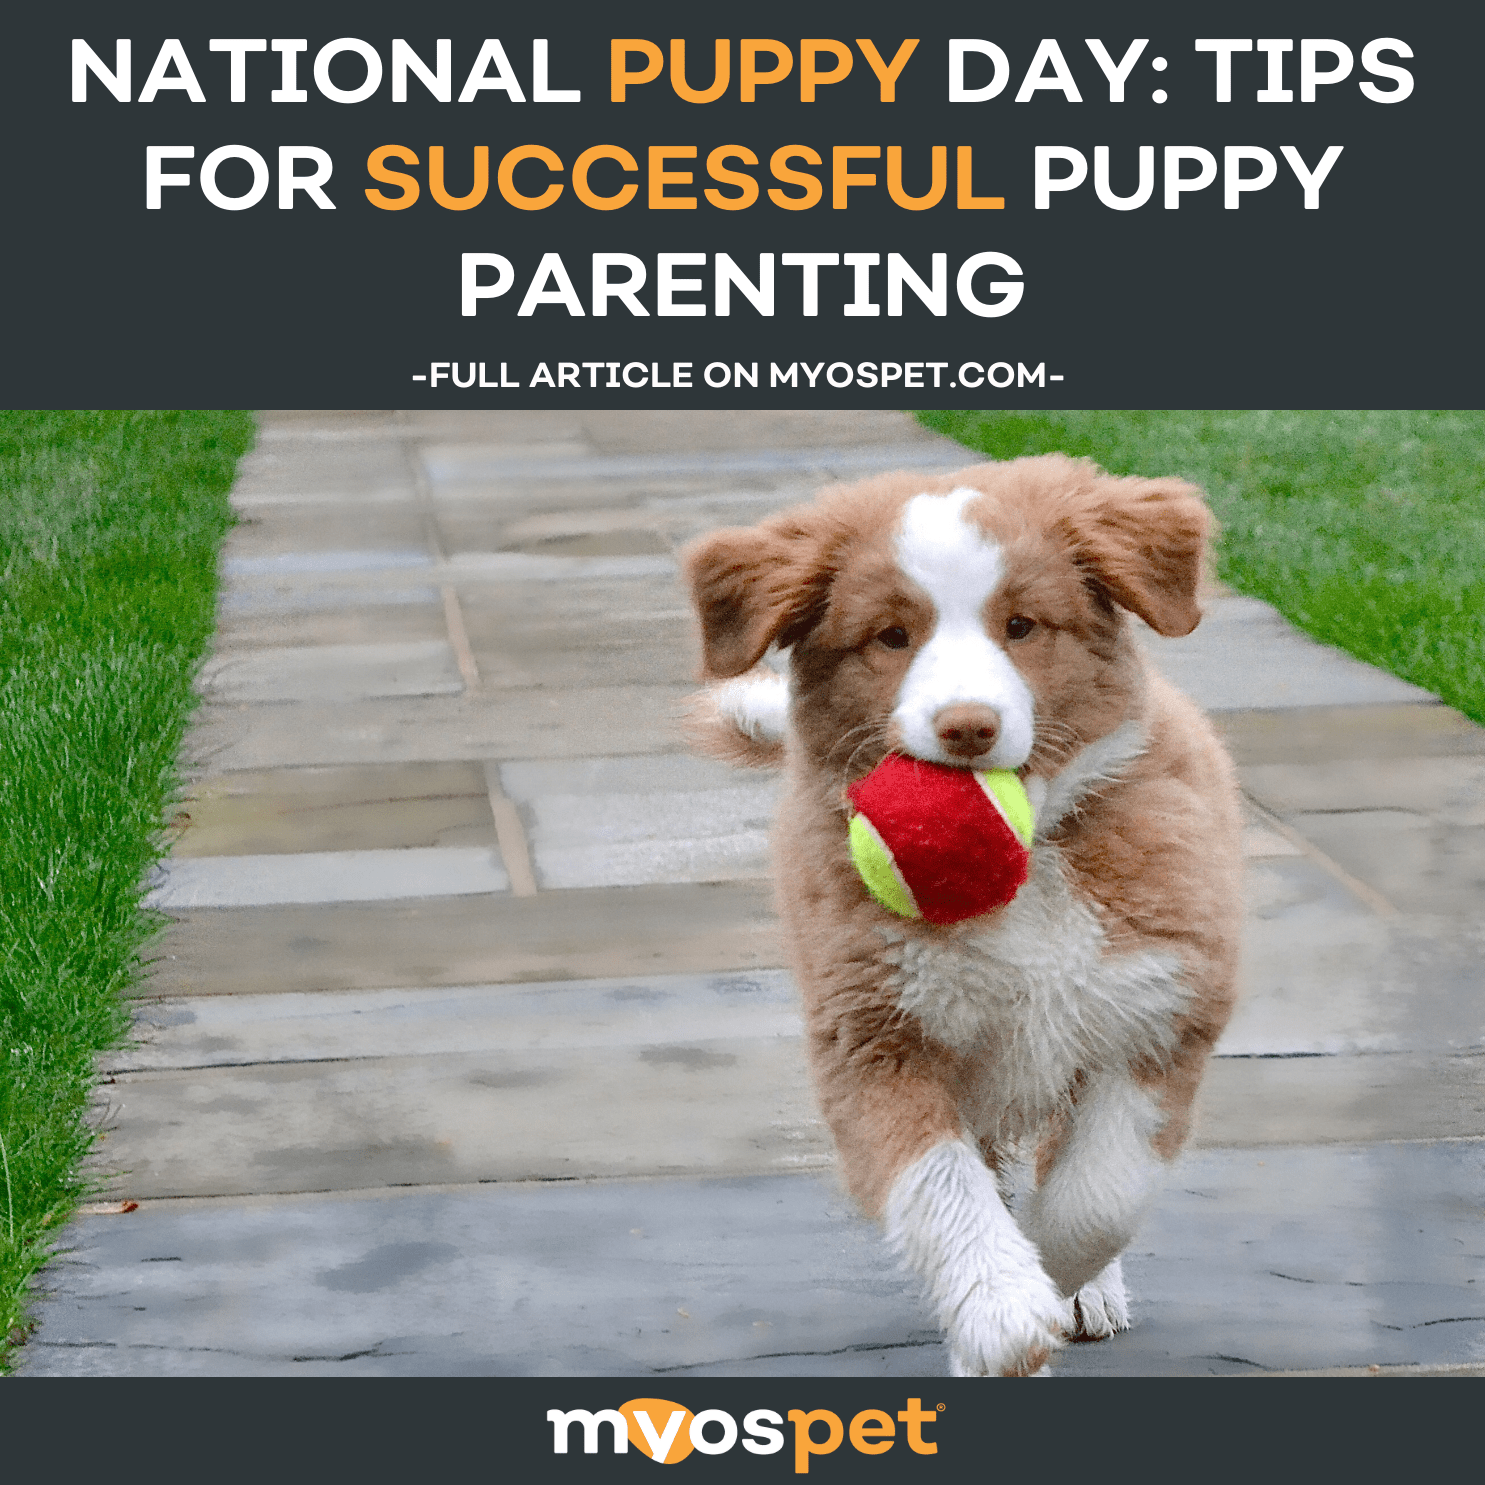 National Puppy Day: Tips for Successful Puppy Parenting